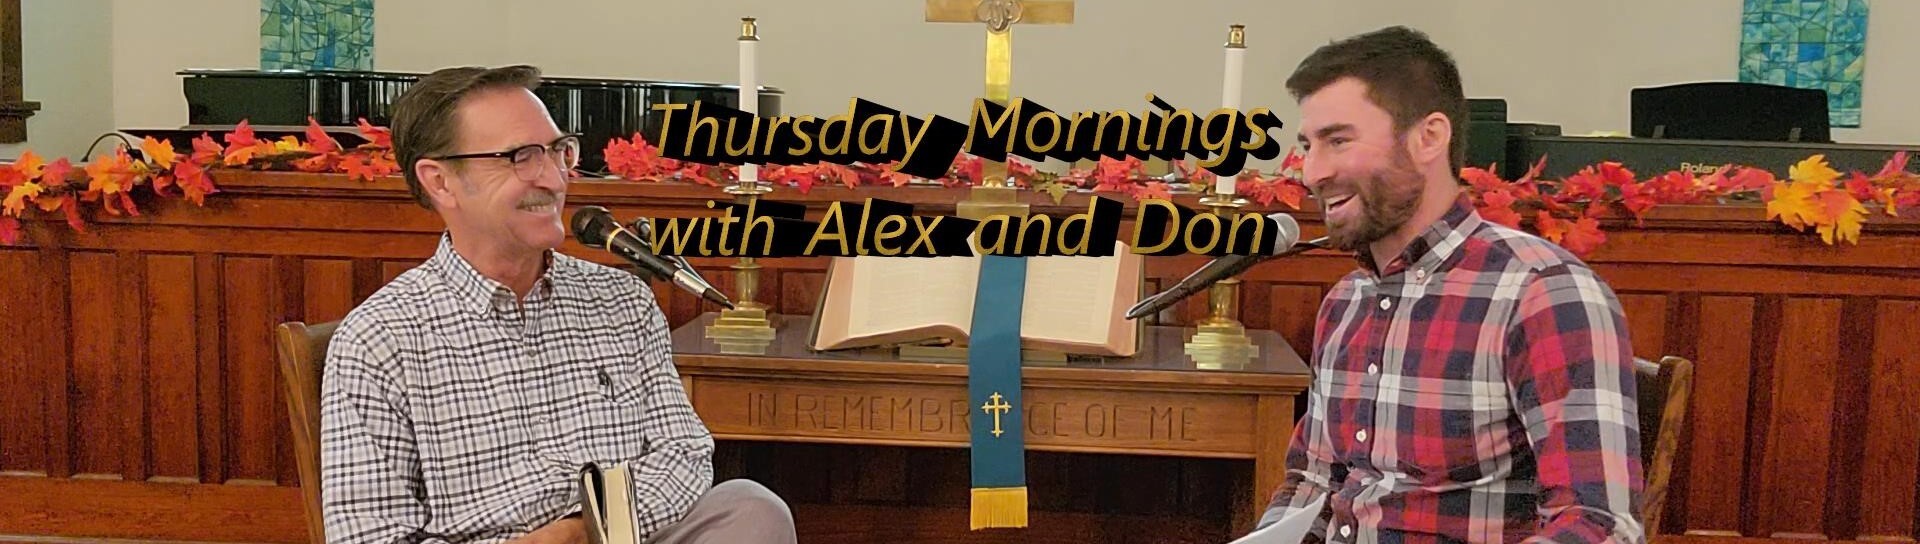 Thursday Mornings with Alex and Don